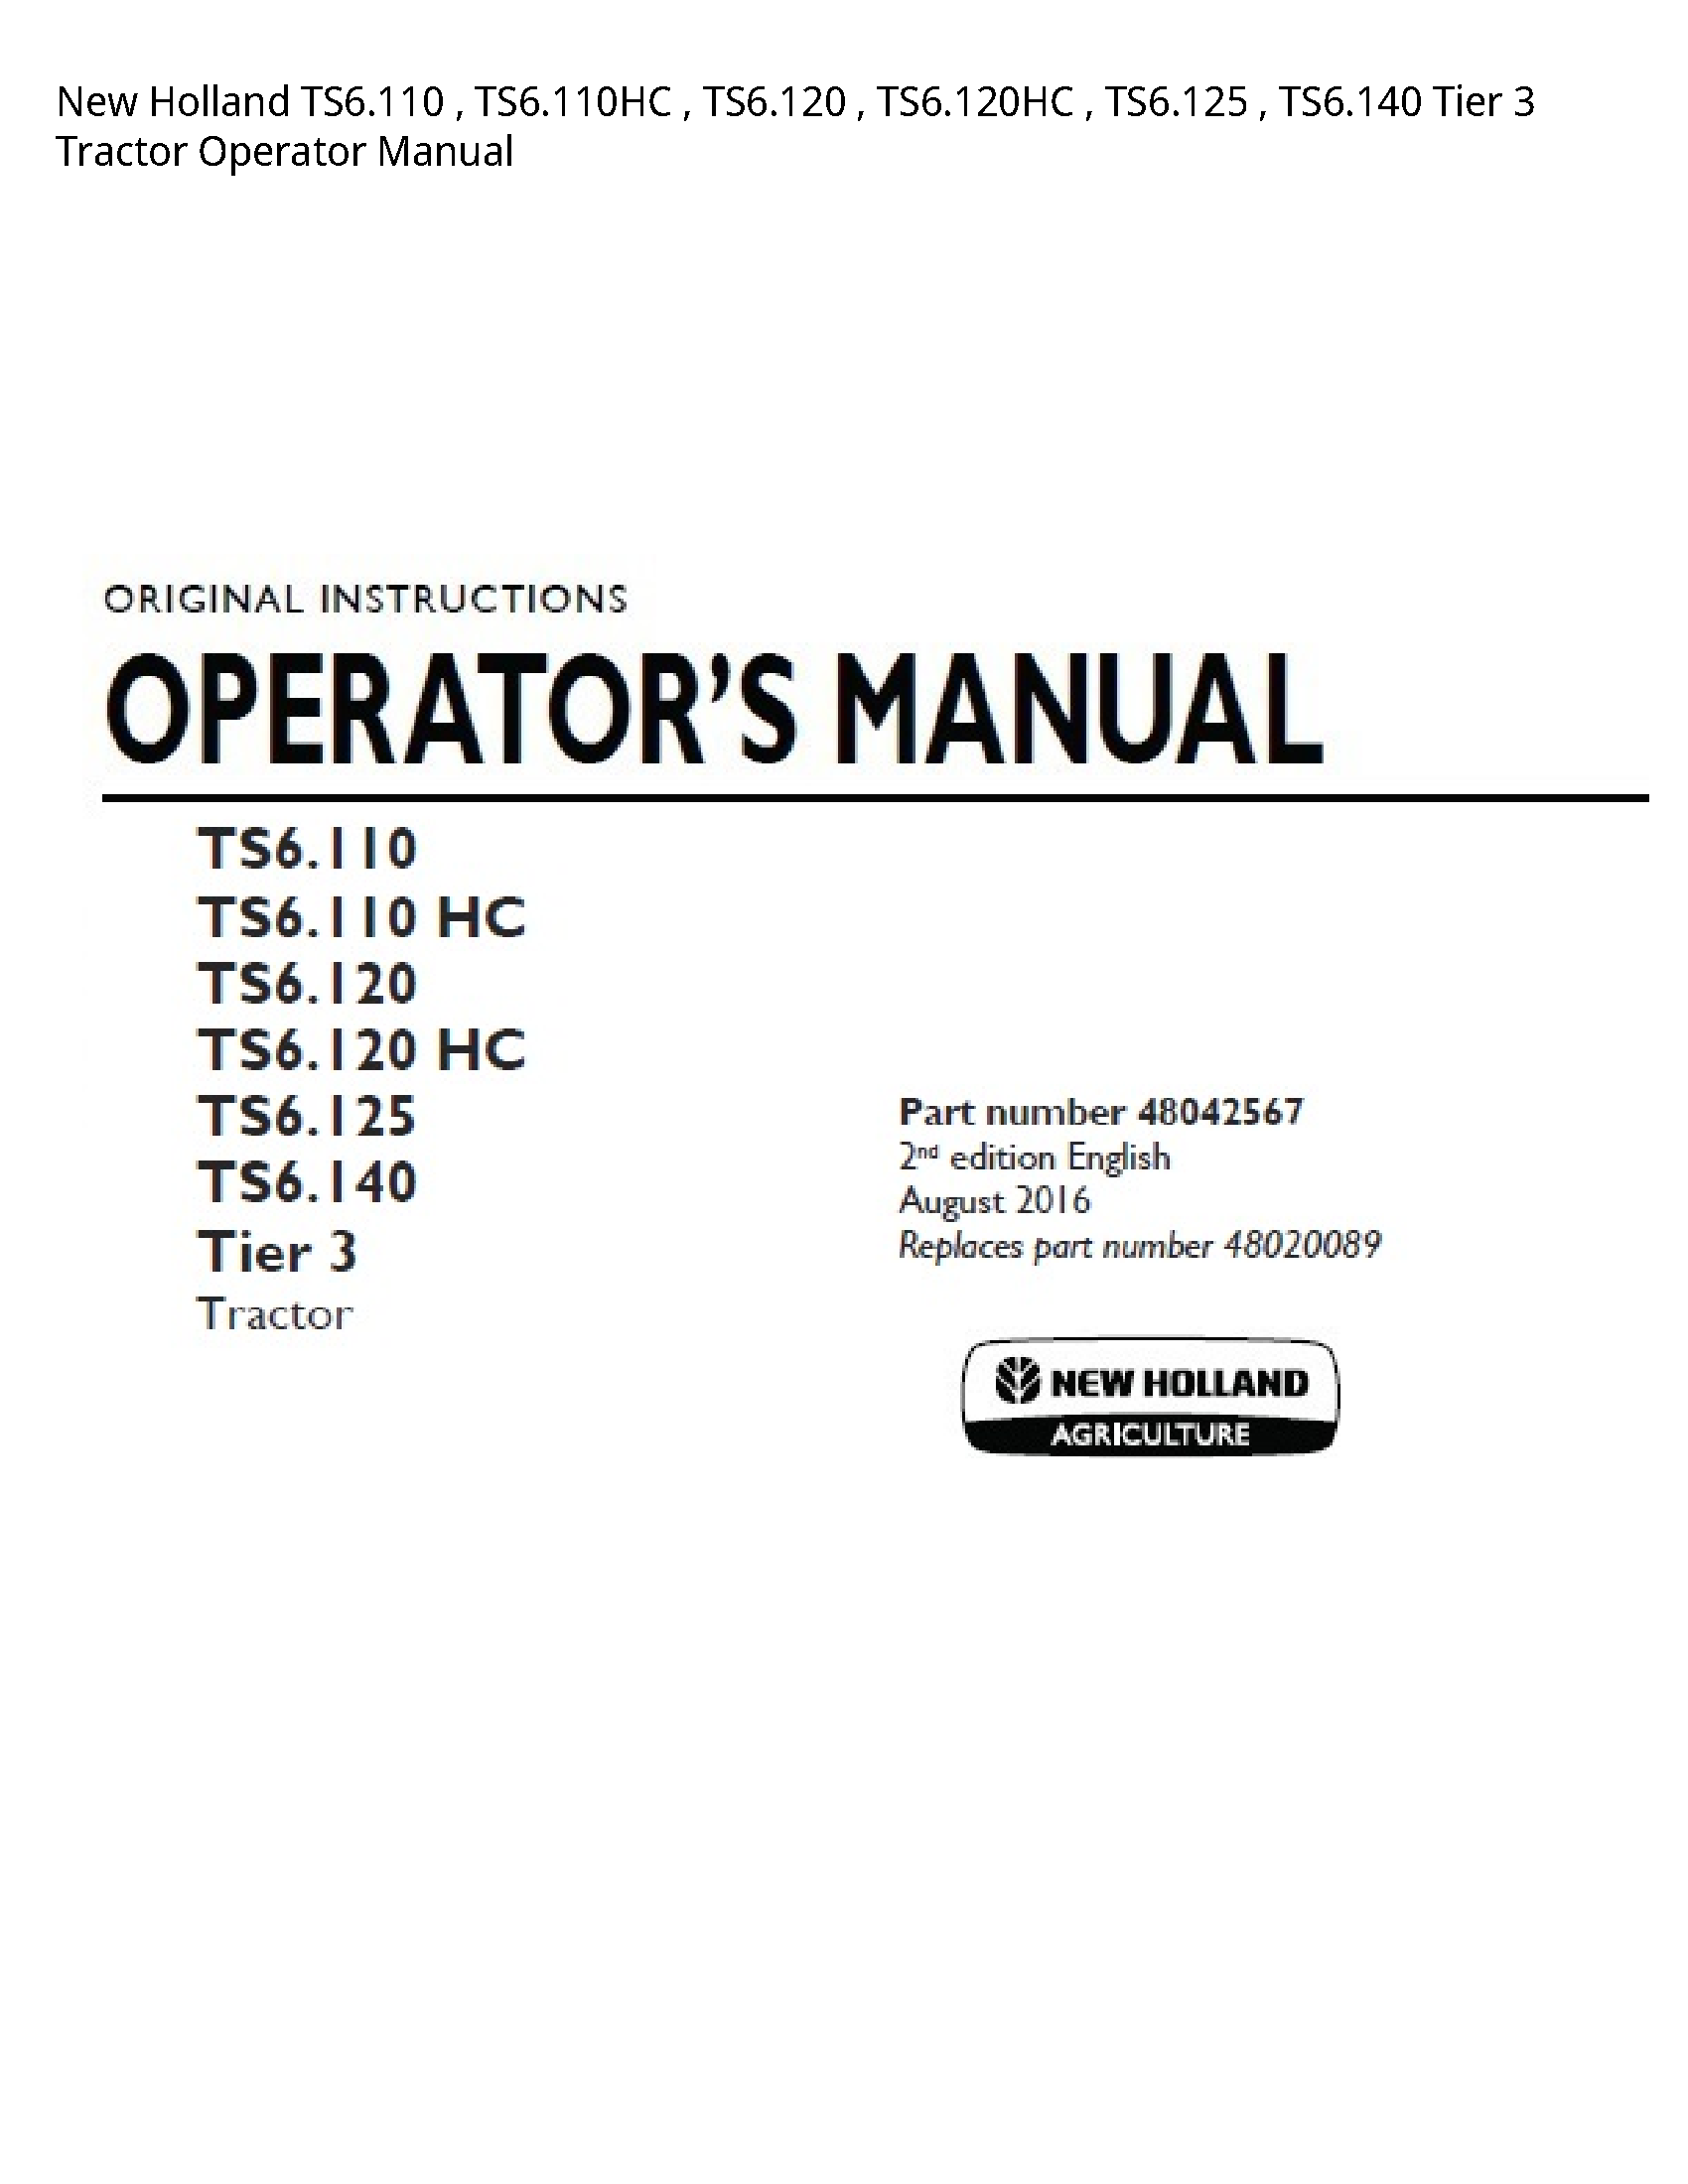 New Holland TS6.110 Tier Tractor Operator manual